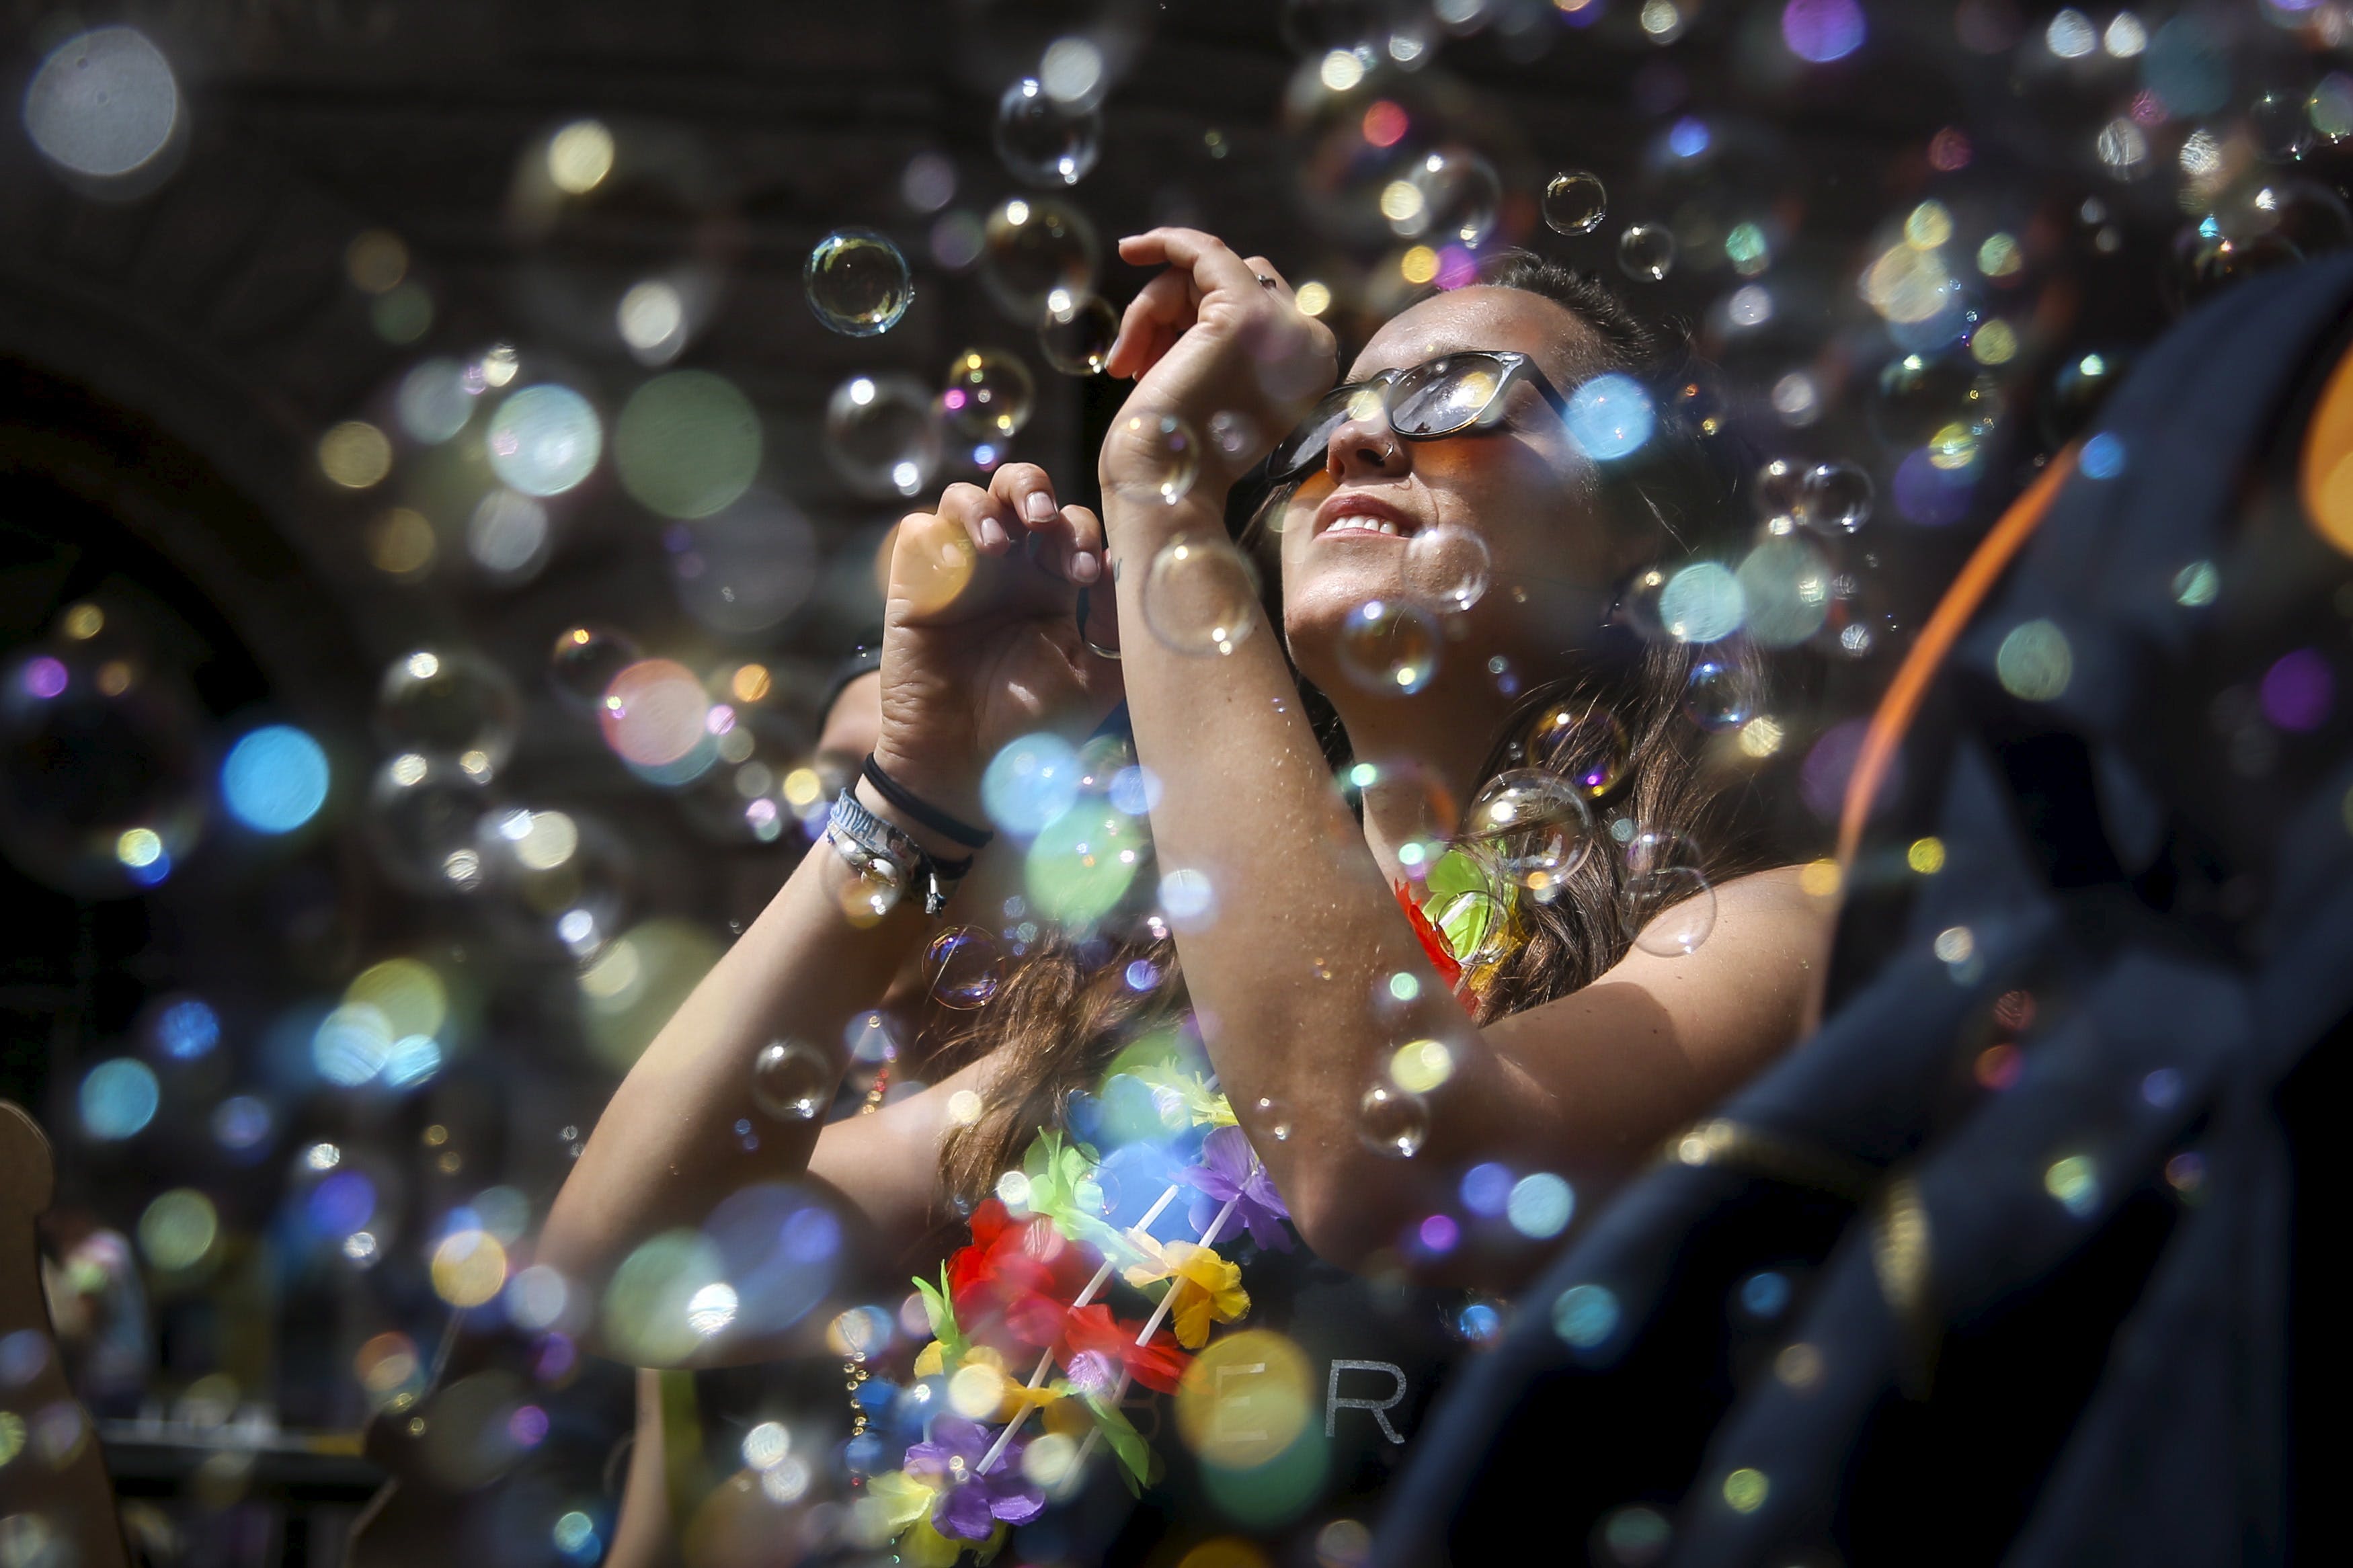 A woman dances in a cloud of bubbles while marching in a gay pride parade in San Francisco, California